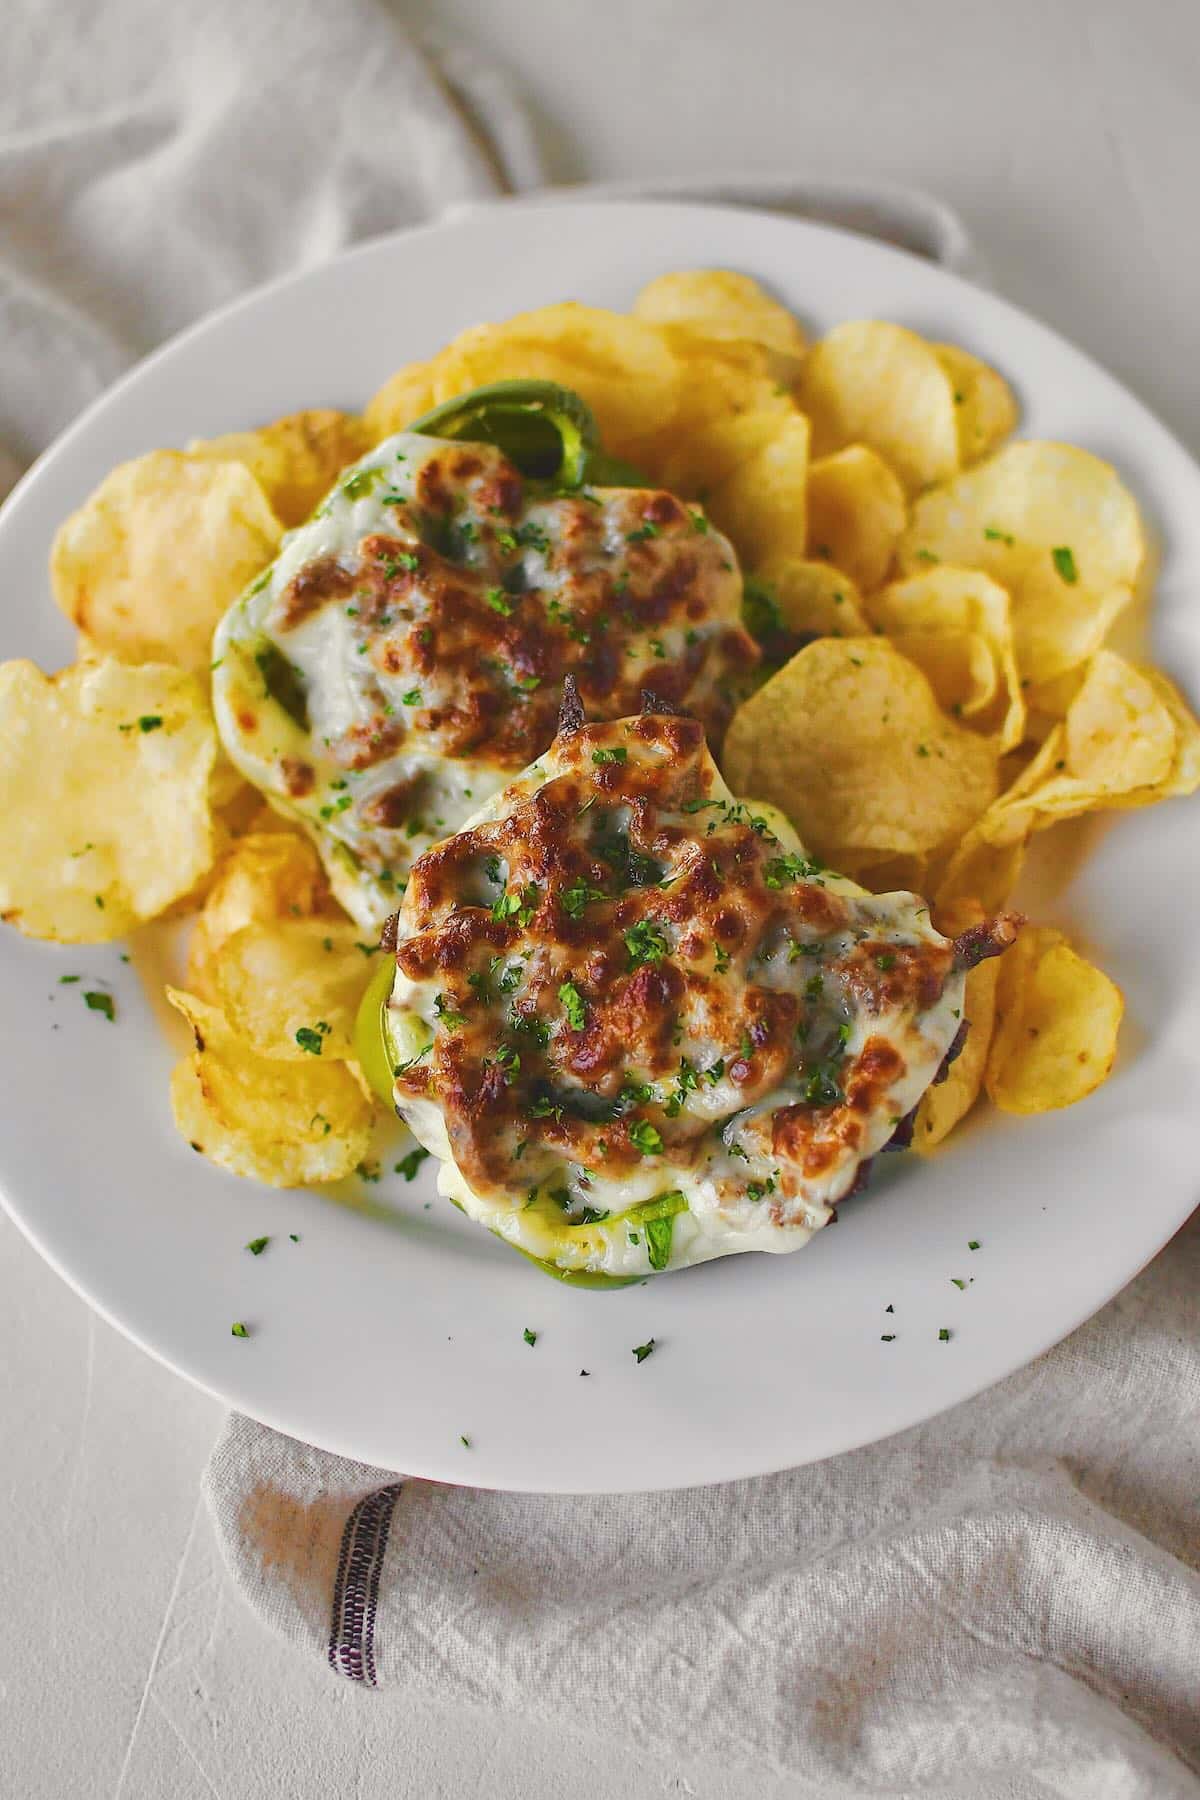 Philly Cheesesteak Stuffed Peppers on a plate ready to eat surrounded by potato chips.